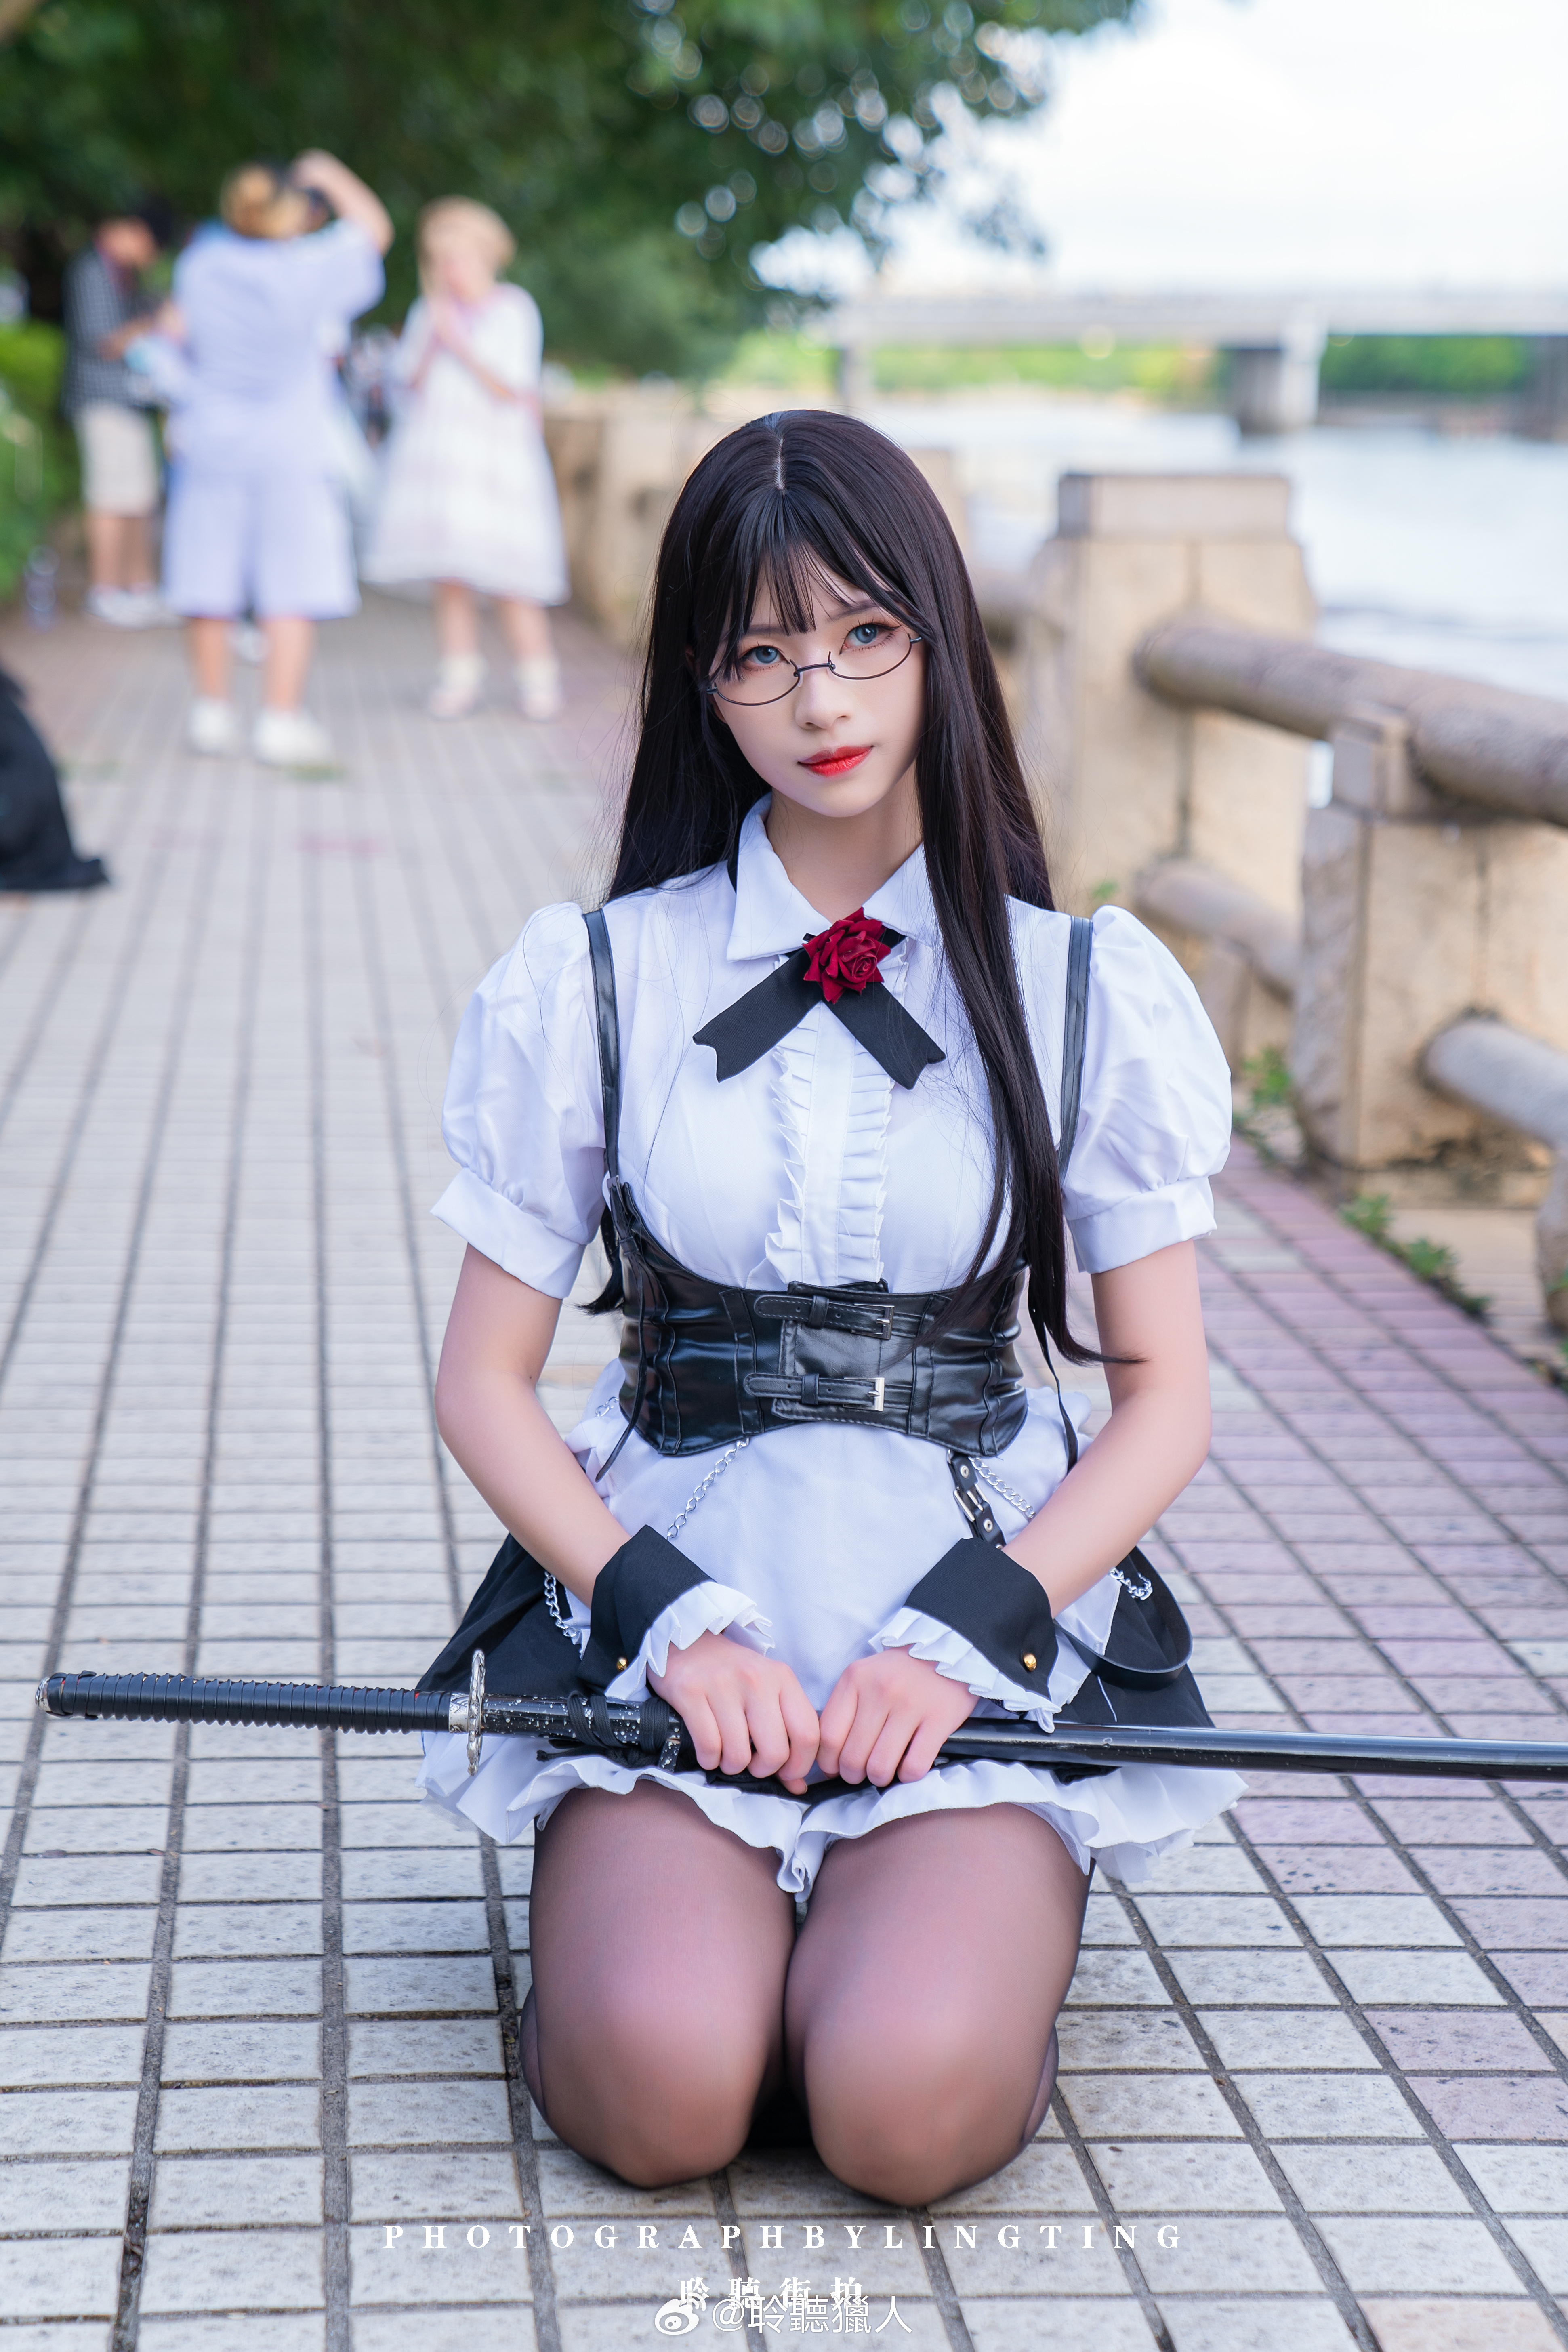 Cosplay Asian Women Portrait Display Looking At Viewer Outdoors Women Outdoors Depth Of Field Long H 3882x5823